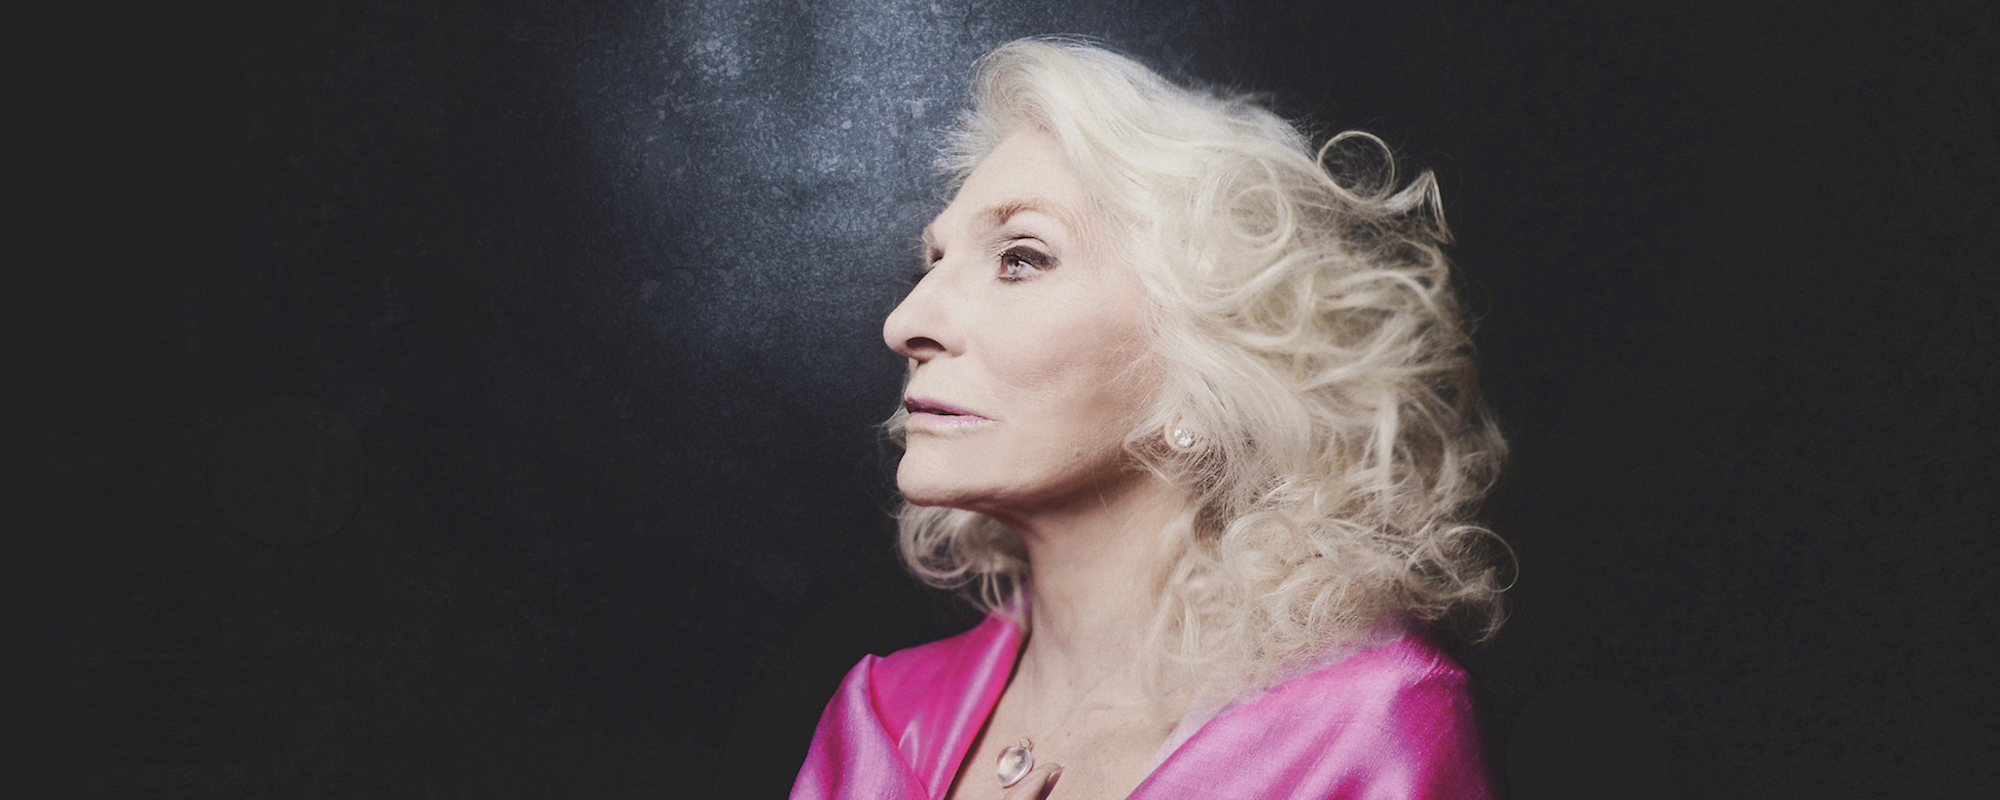 Judy Collins Looks Back on Her Times with New Album ‘Spellbound’